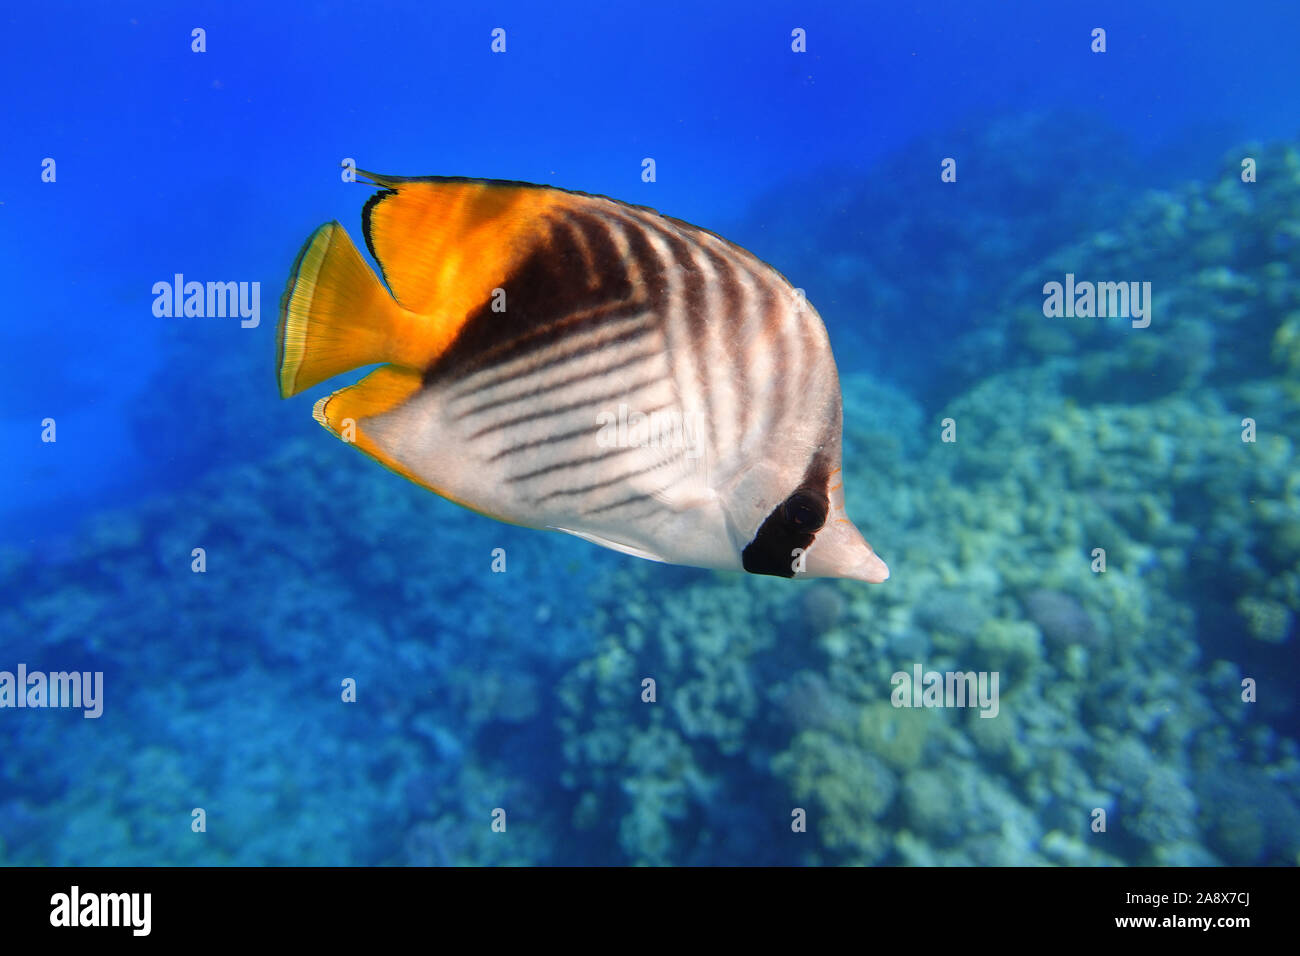 Butterflyfish In The Ocean. Threadfin butterflyfish With Black, Yellow And White Stripes. Tropical Fish In The Sea Near Coral Reef. Stock Photo